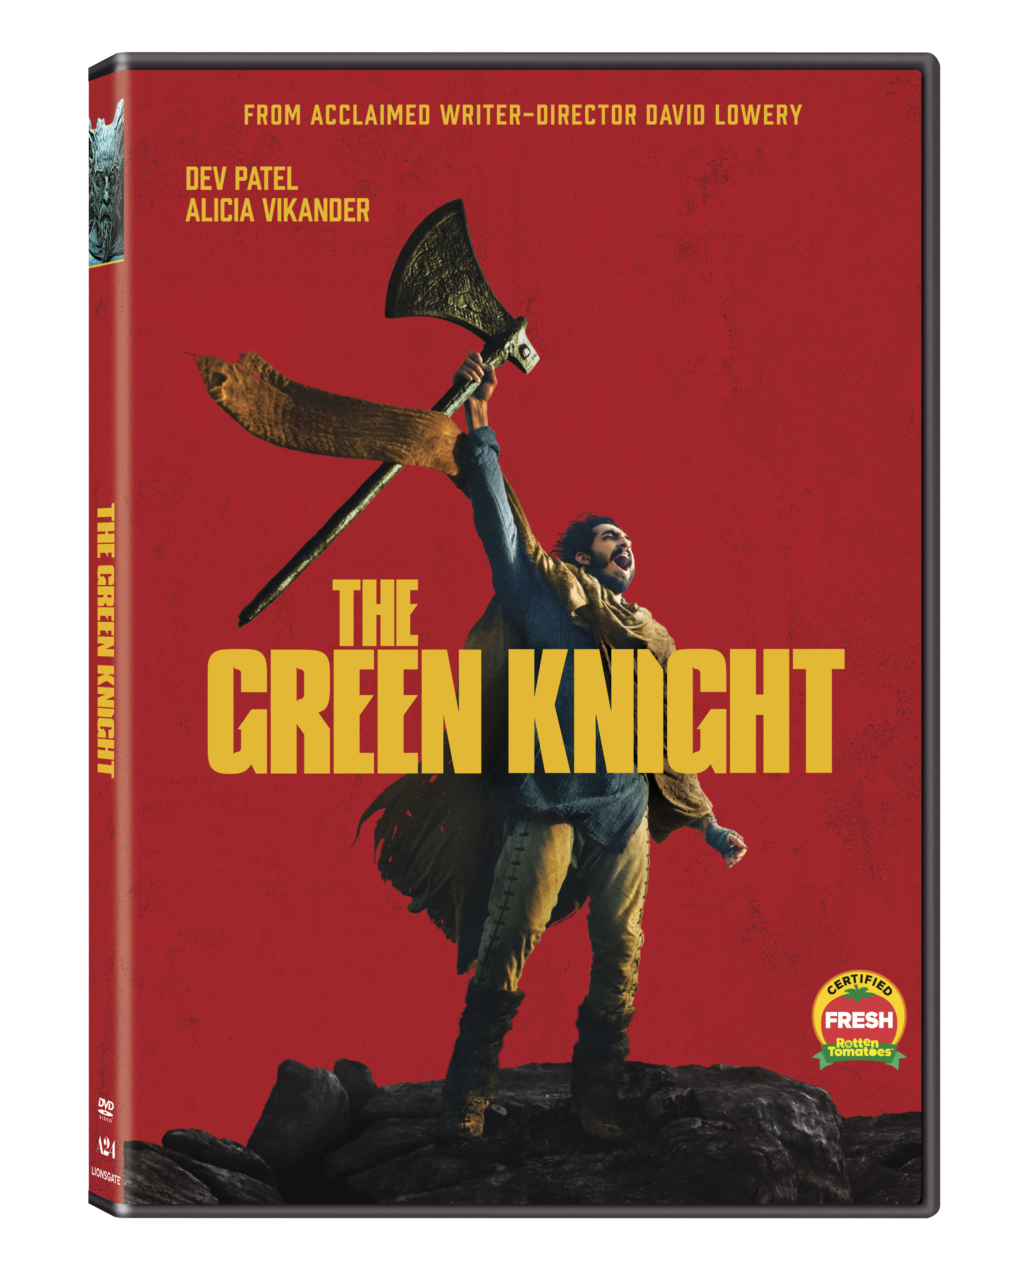 The Green Knight DVD cover (Lionsgate)